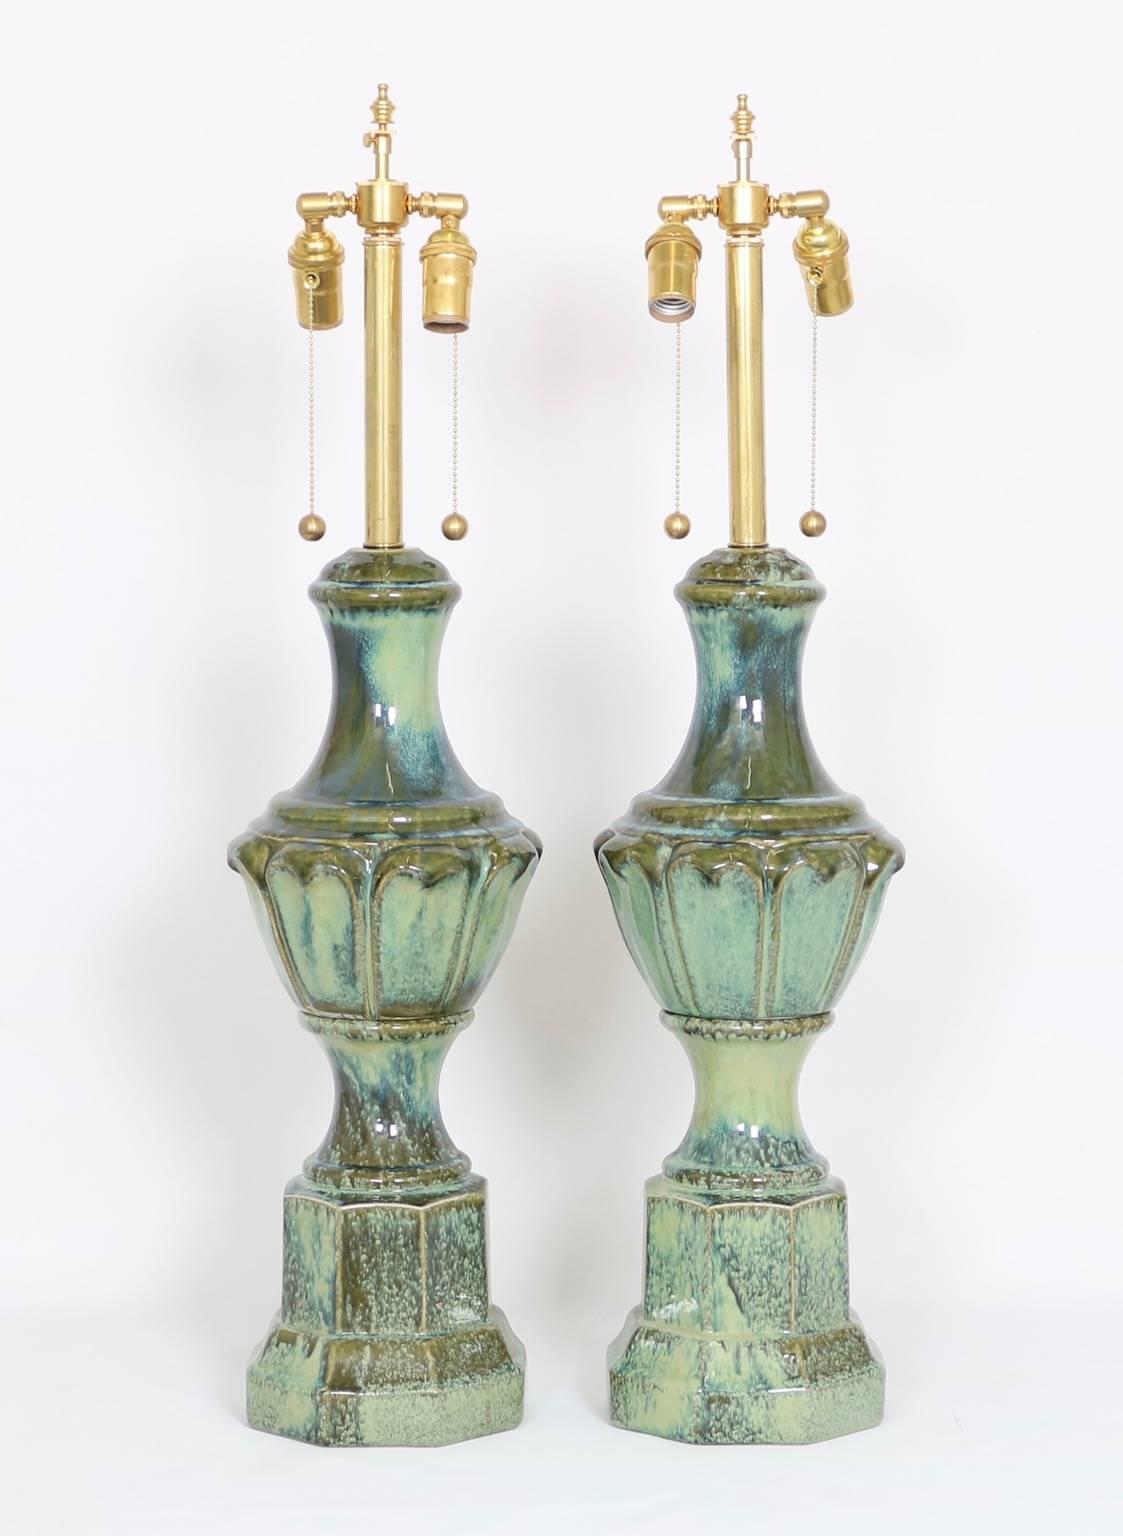 Hollywood Regency Pair of Mid-Century Majolica Style Porcelain Baluster Lamps